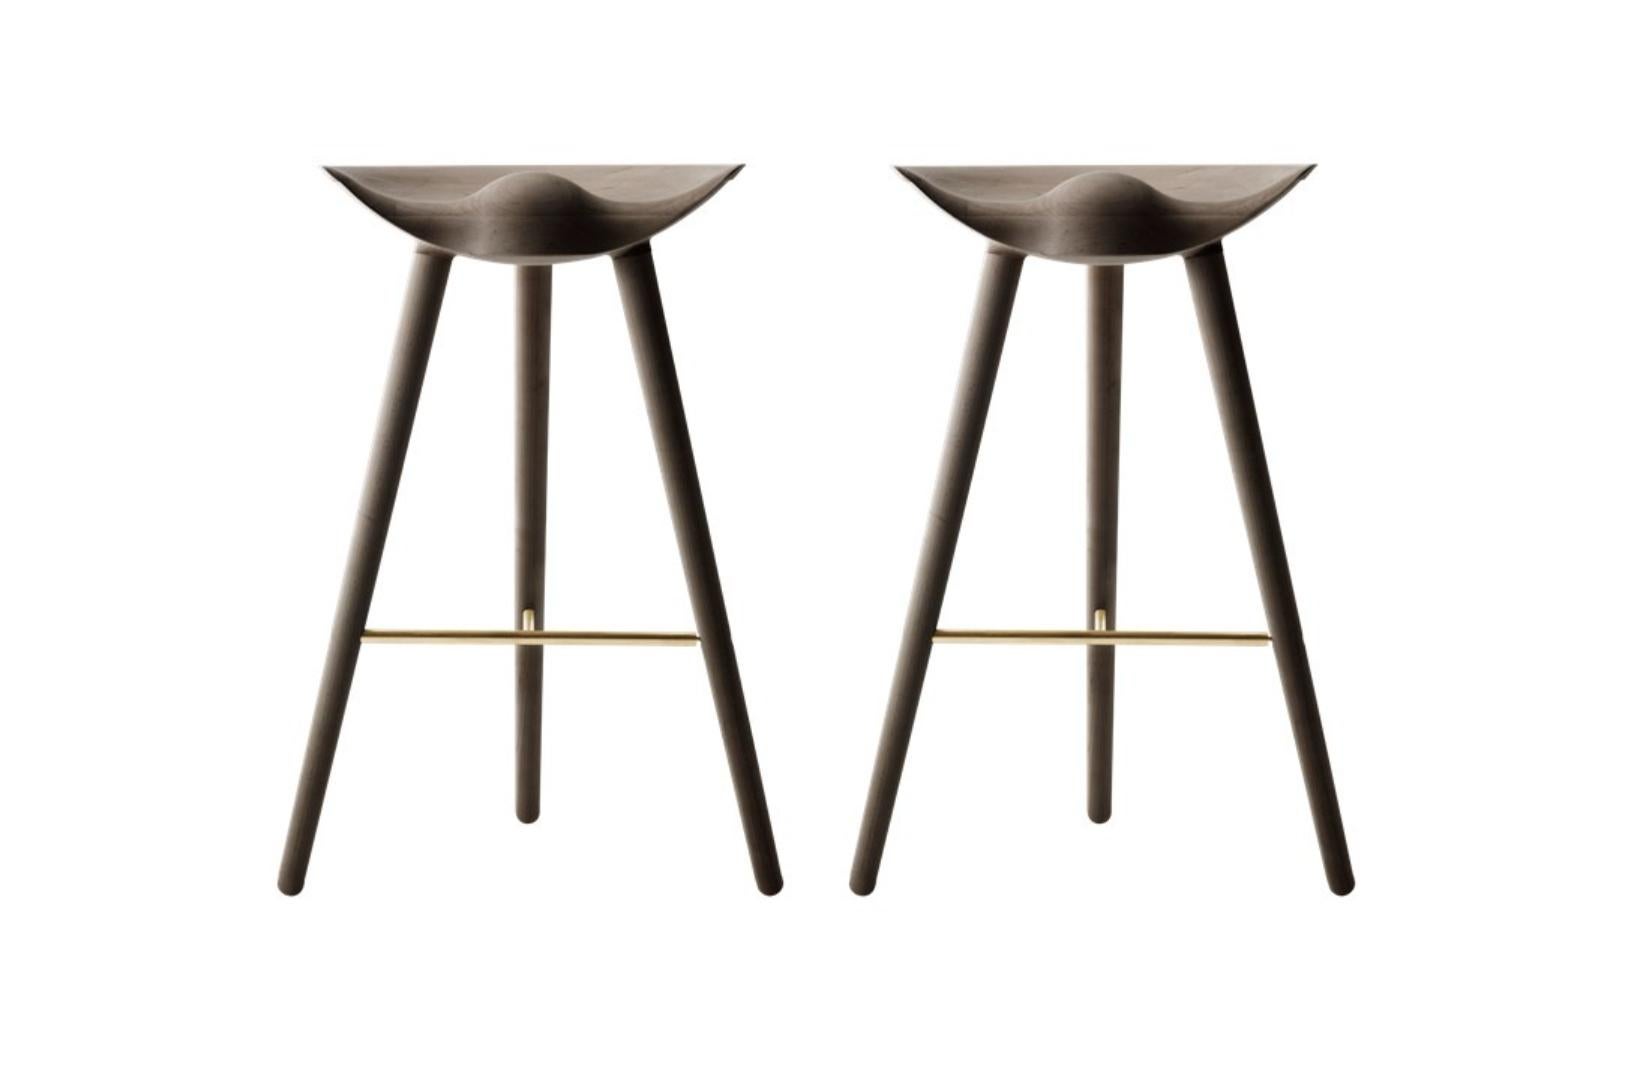 Set Of 2 Brown Oak and Brass Bar Stools by Lassen
Dimensions: H 77 x W 36 x L 55.5 cm
Materials: Oak, Brass

In 1942 Mogens Lassen designed the Stool ML42 as a piece for a furniture exhibition held at the Danish Museum of Decorative Art. He took